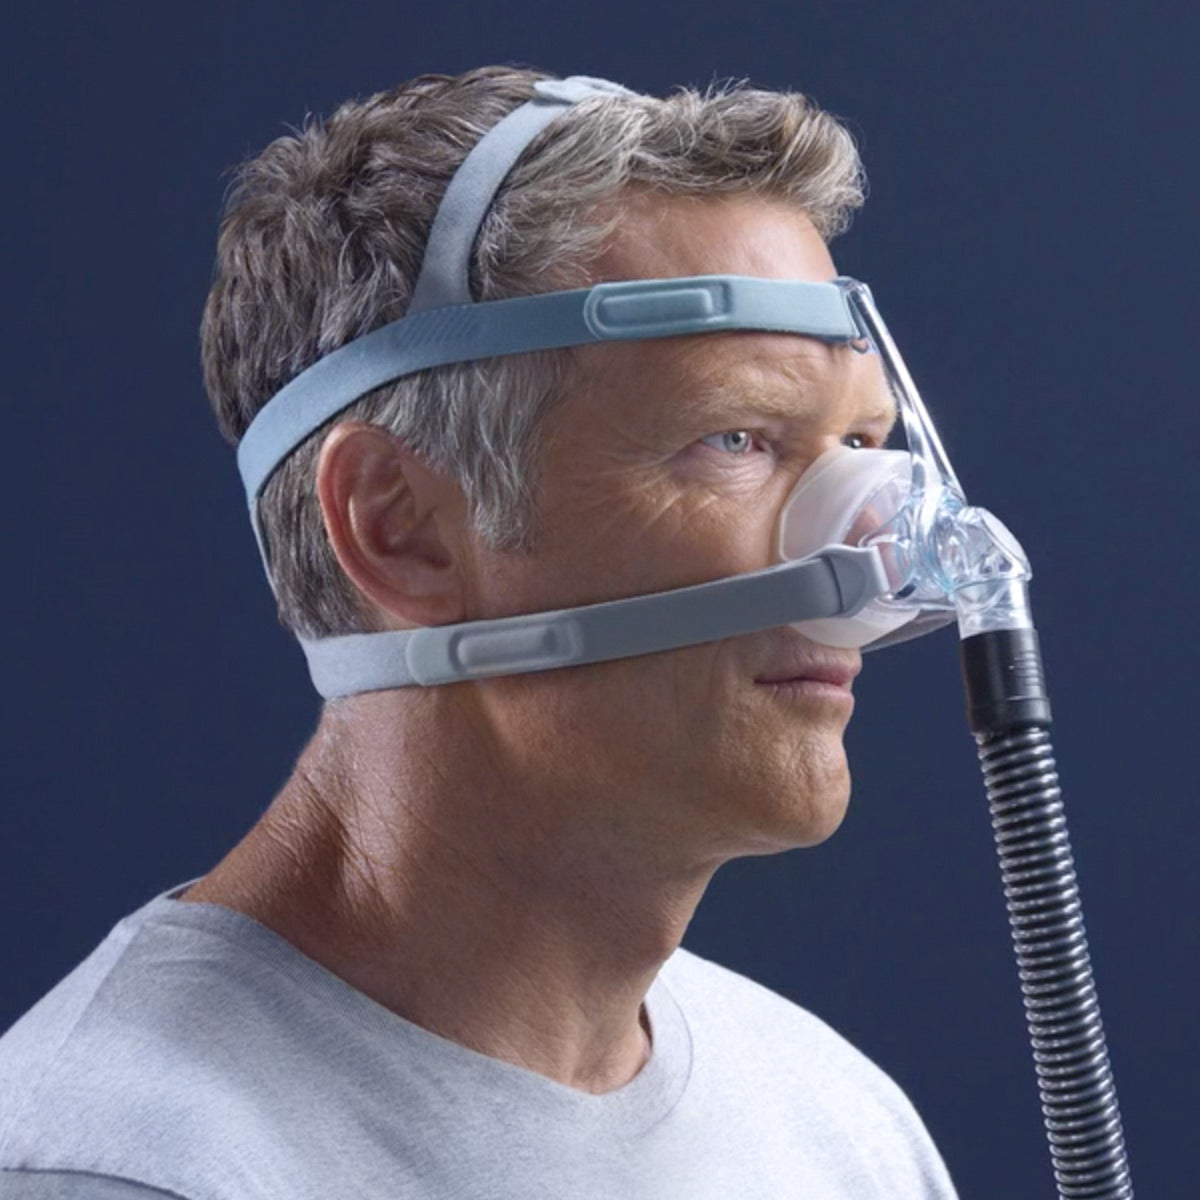 F&P Eson 2 Nasal CPAP/BiPAP Mask with Headgear